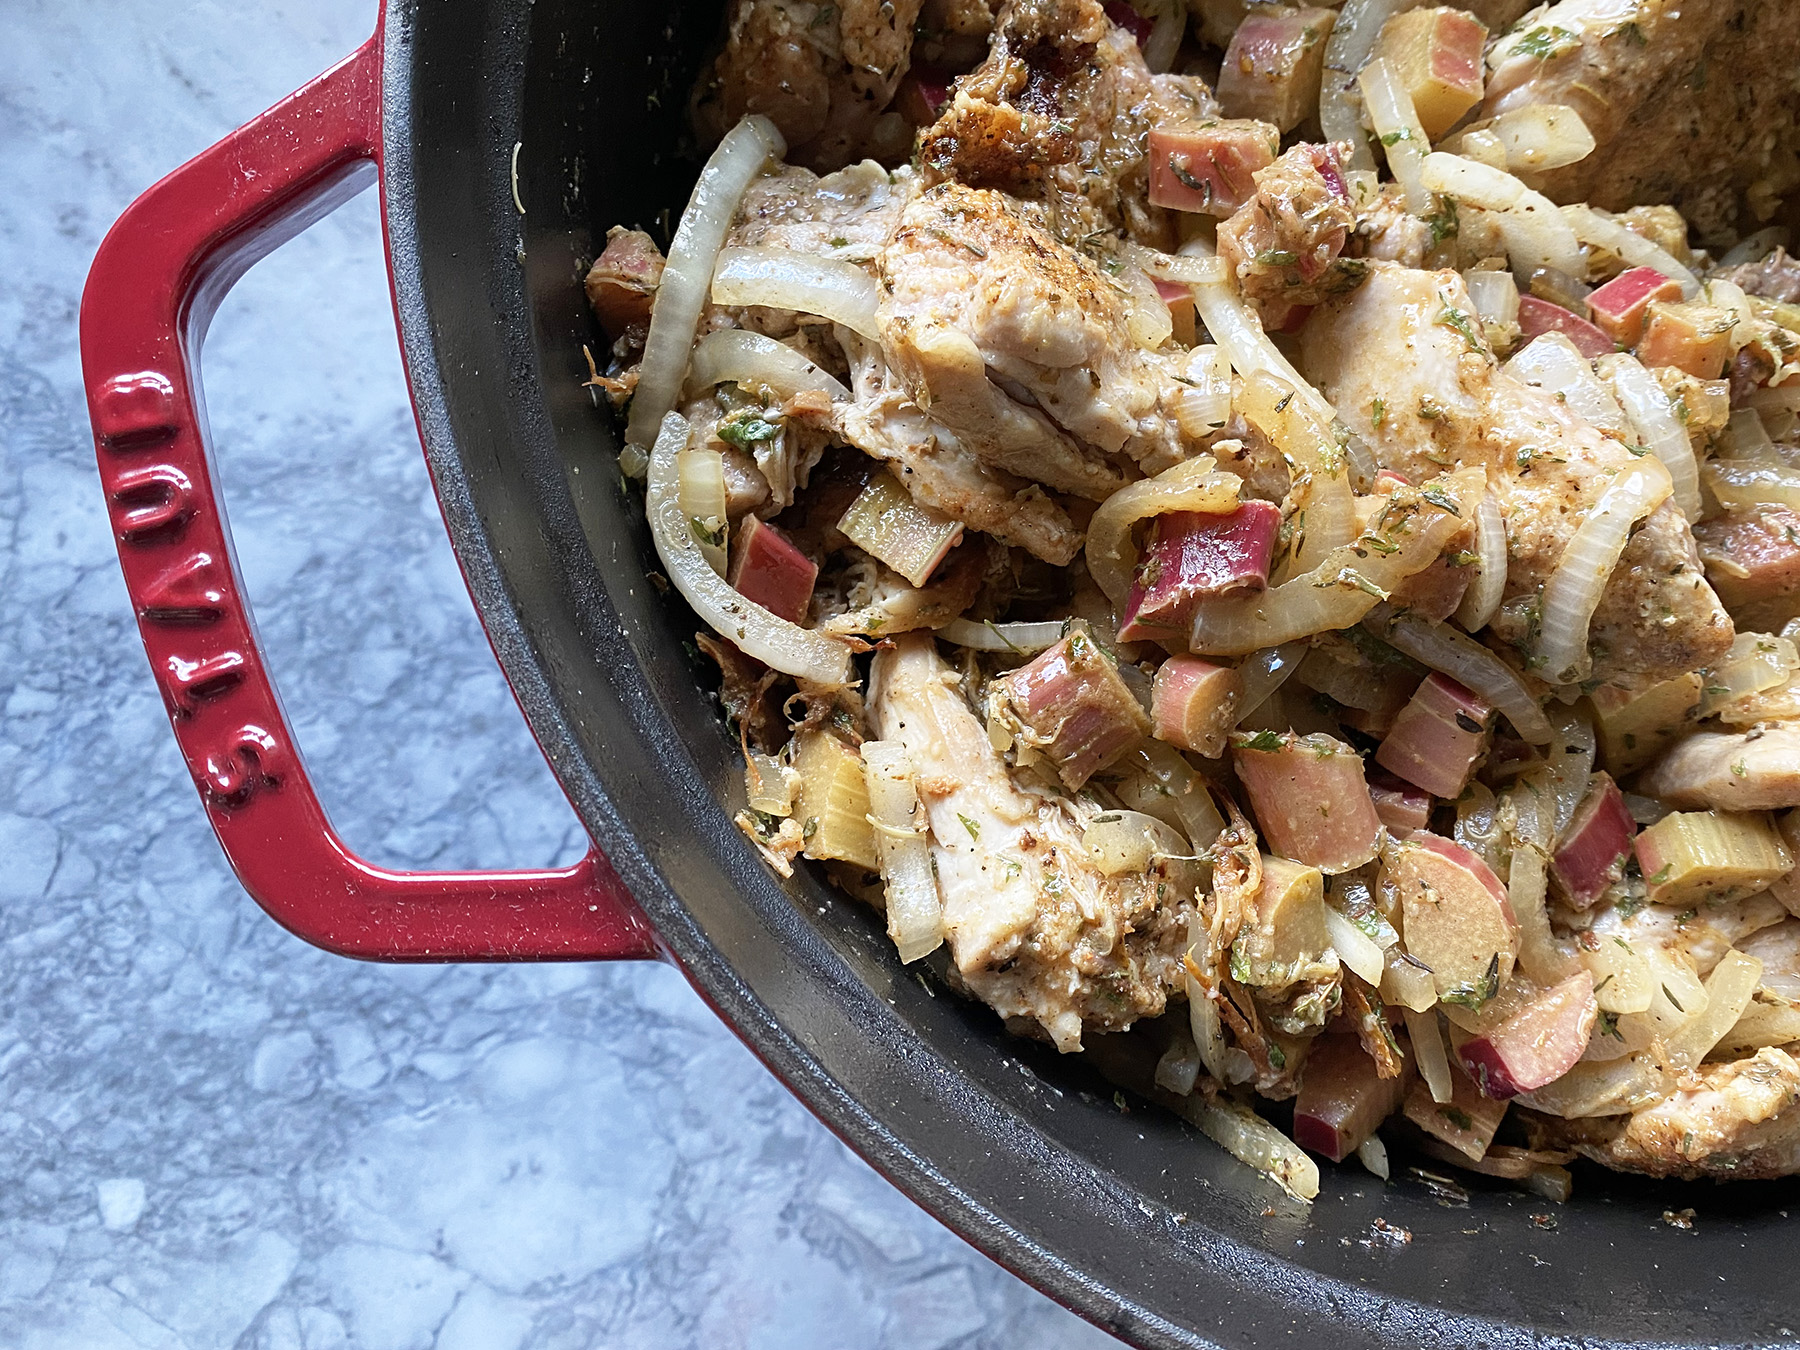 Rhubarb Smothered Chicken